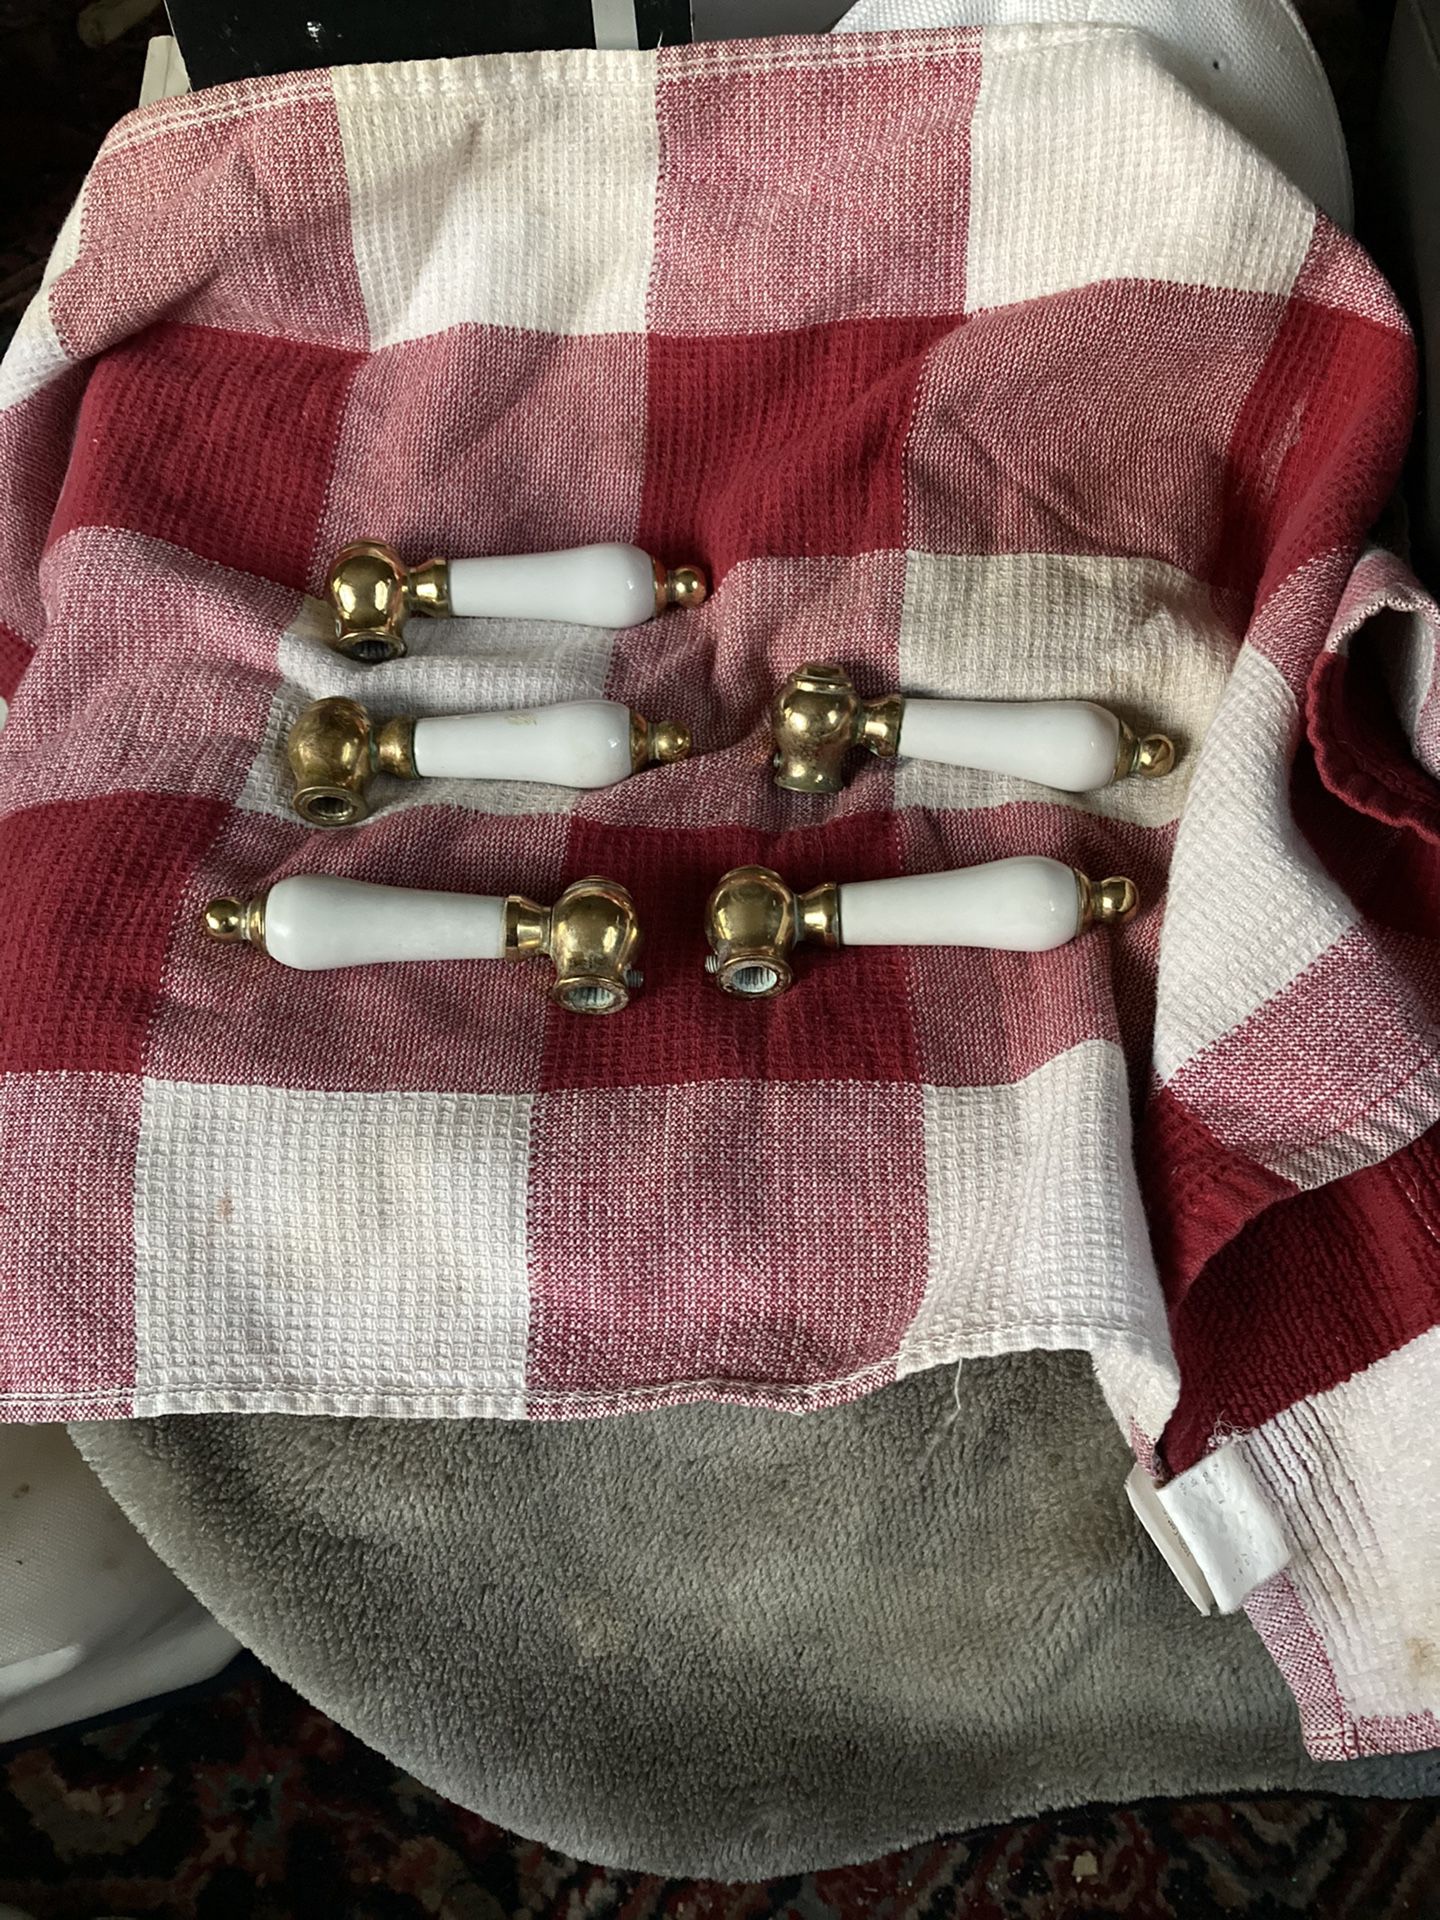 Porcelain And Brass Levers